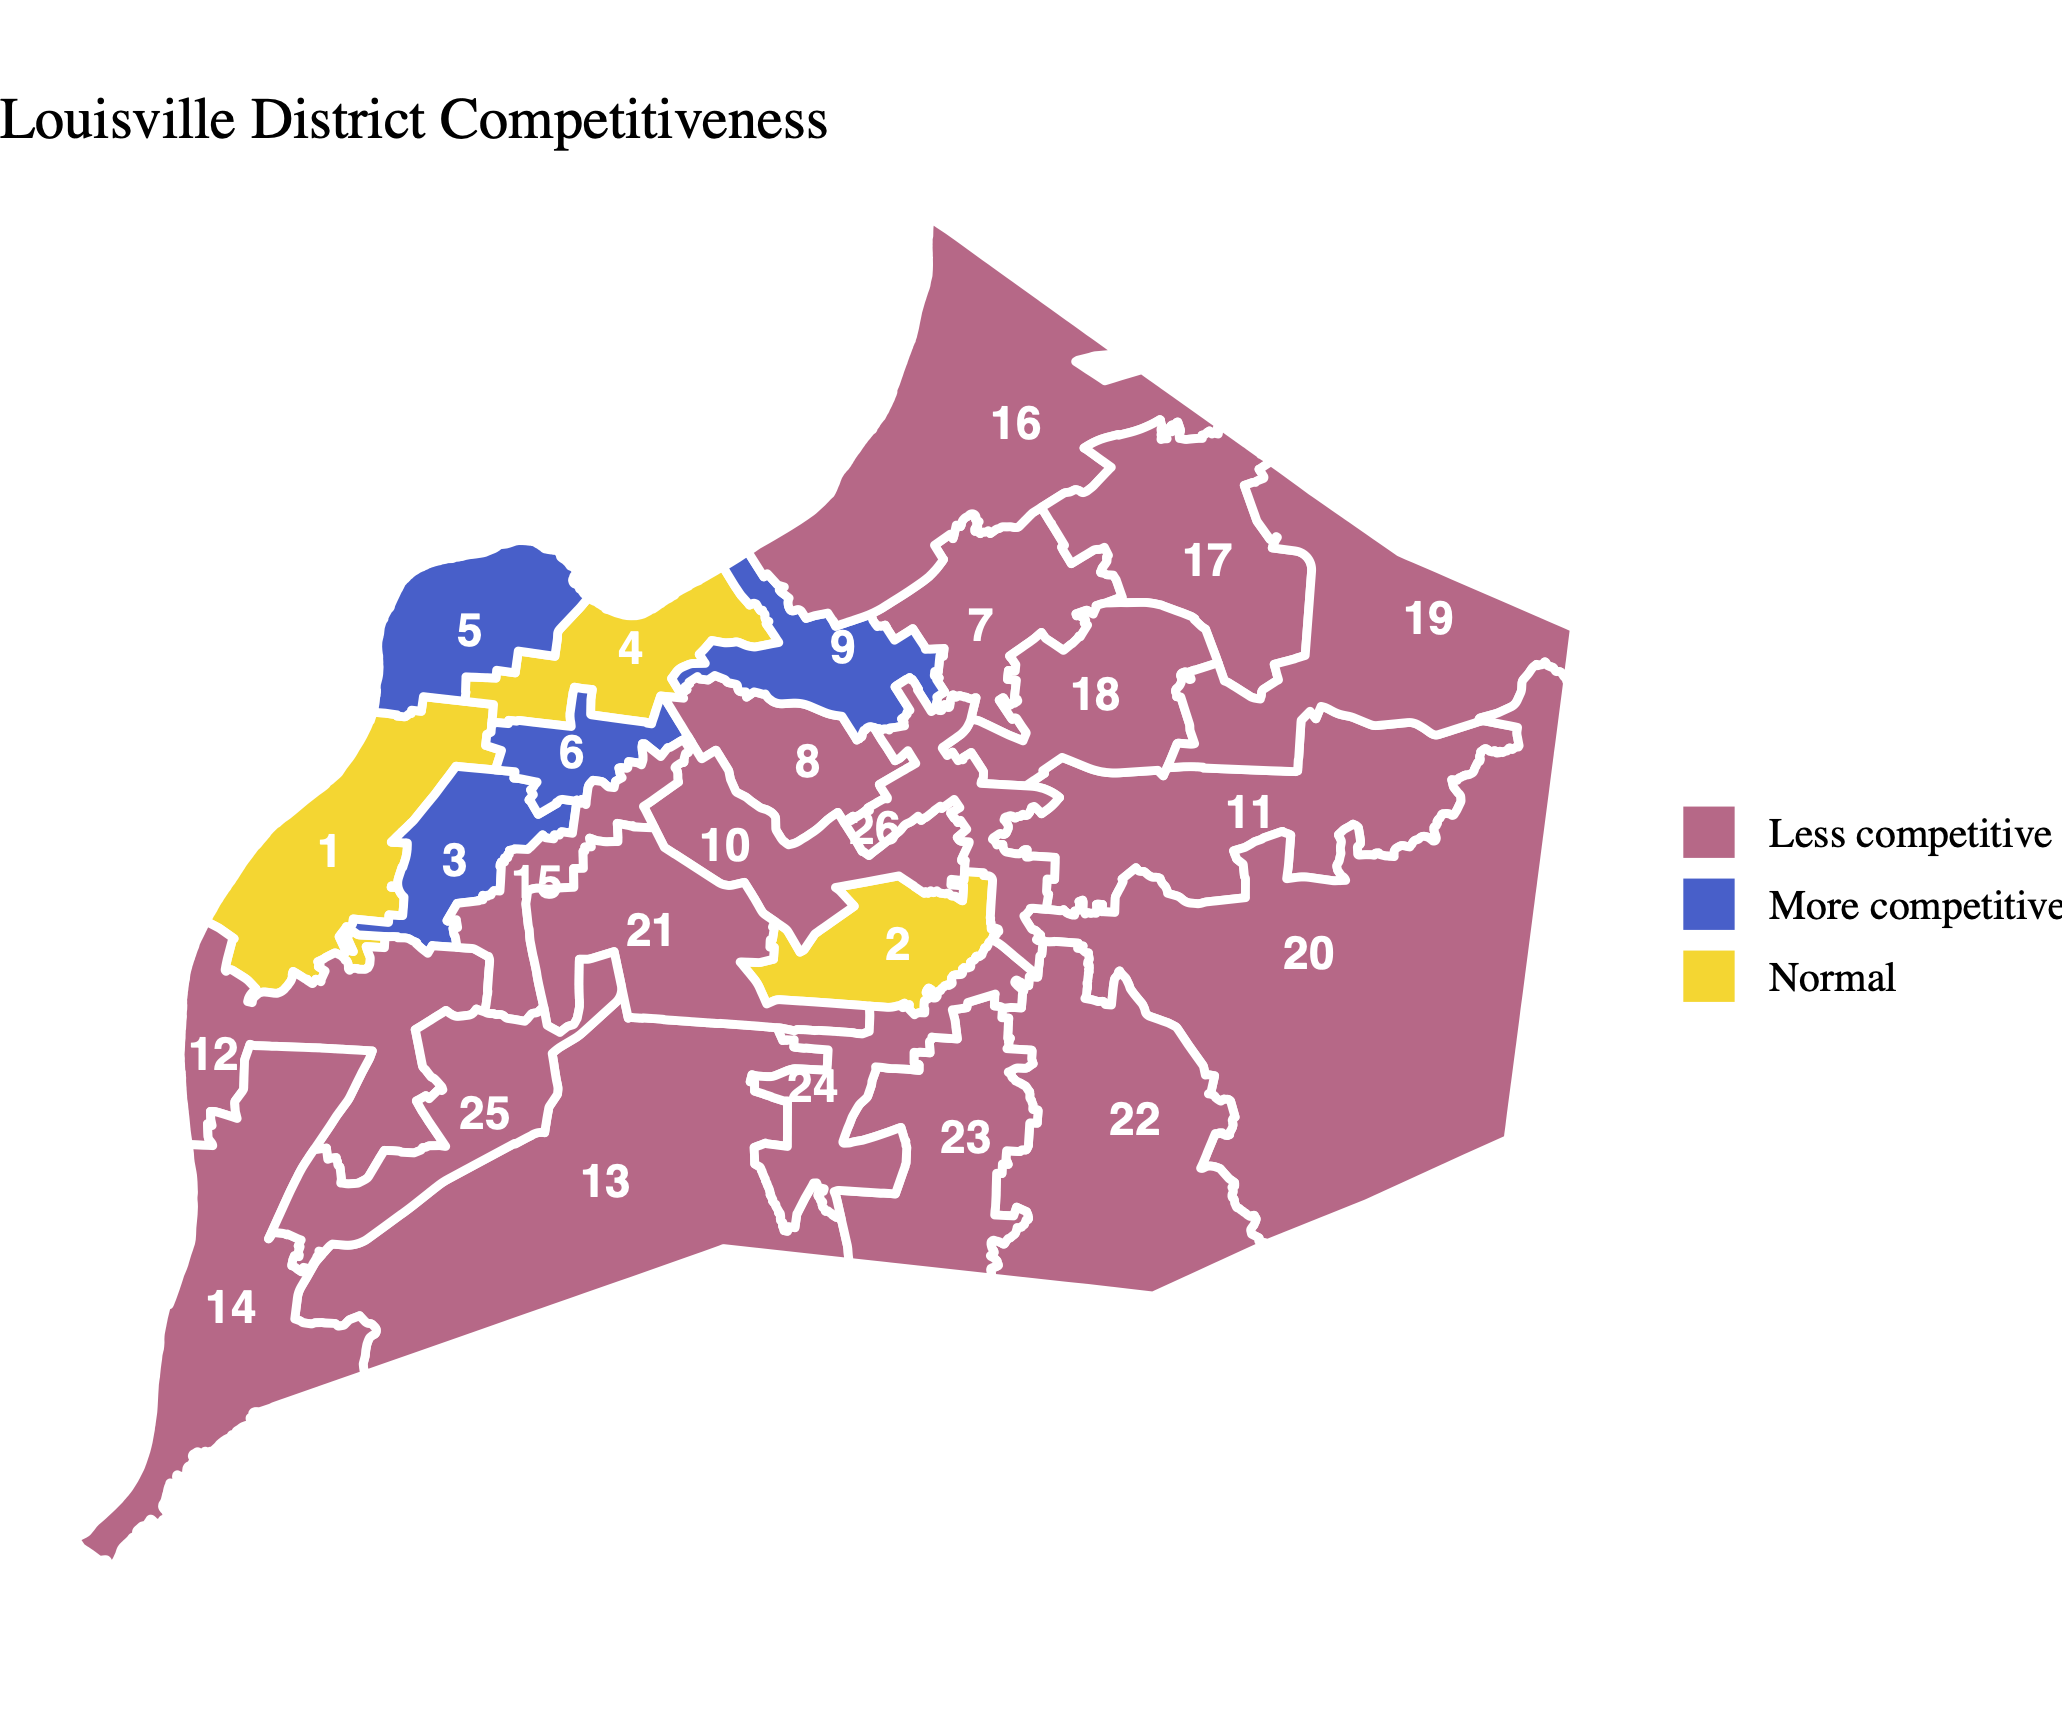 Figure 4: This map illustrates the results as follows: pink represents districts that are less competitive, blue represents districts that are more competitive, and yellow represents those falling within the normal range.